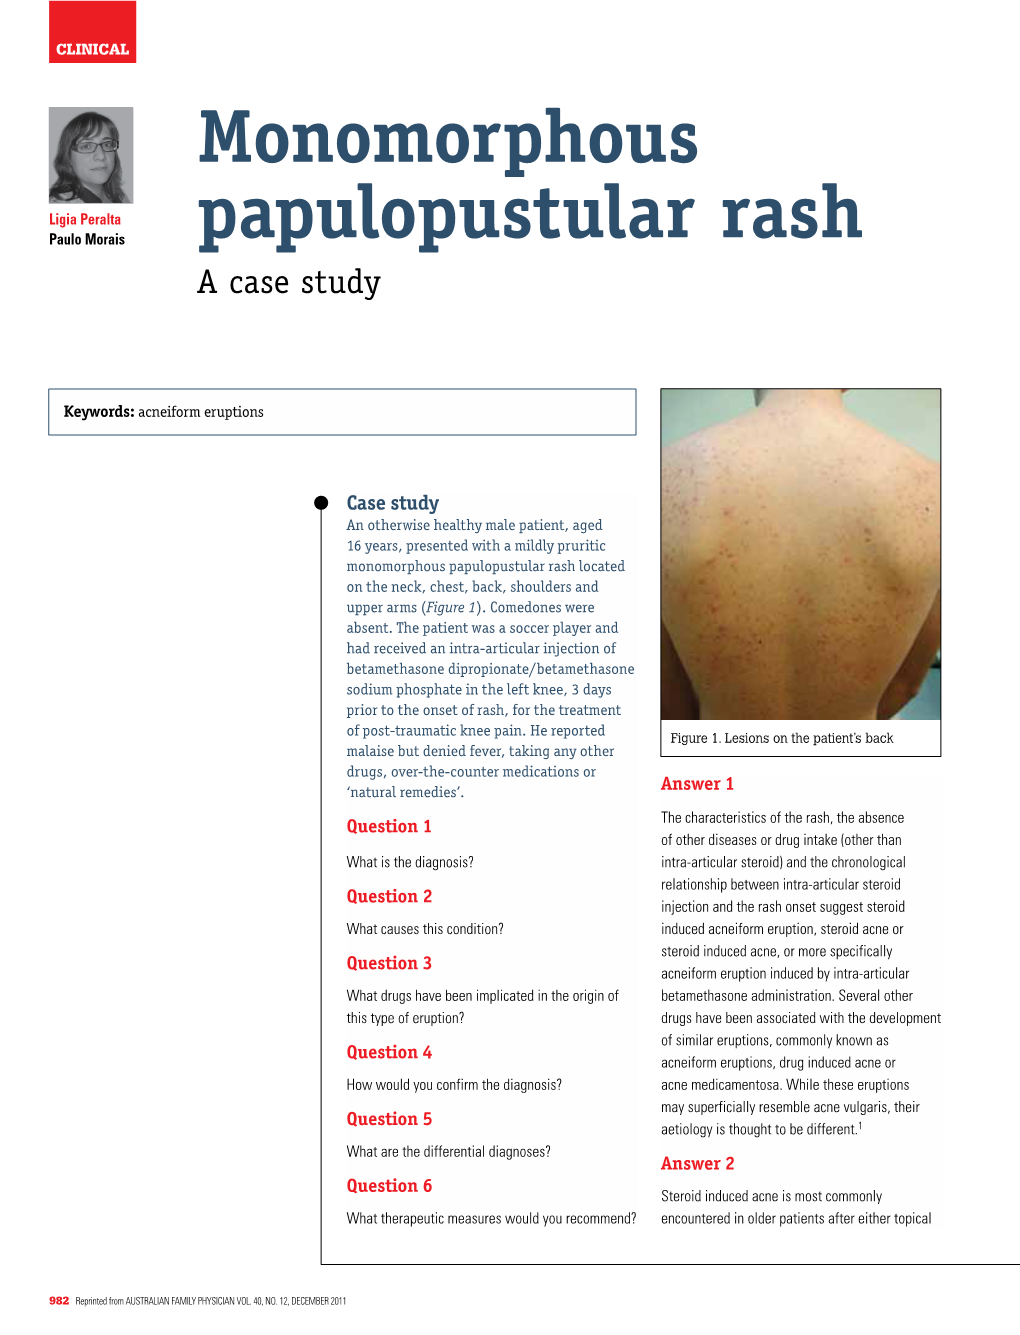 Monomorphous Papulopustular Rash Located on the Neck, Chest, Back, Shoulders and Upper Arms (Figure 1)